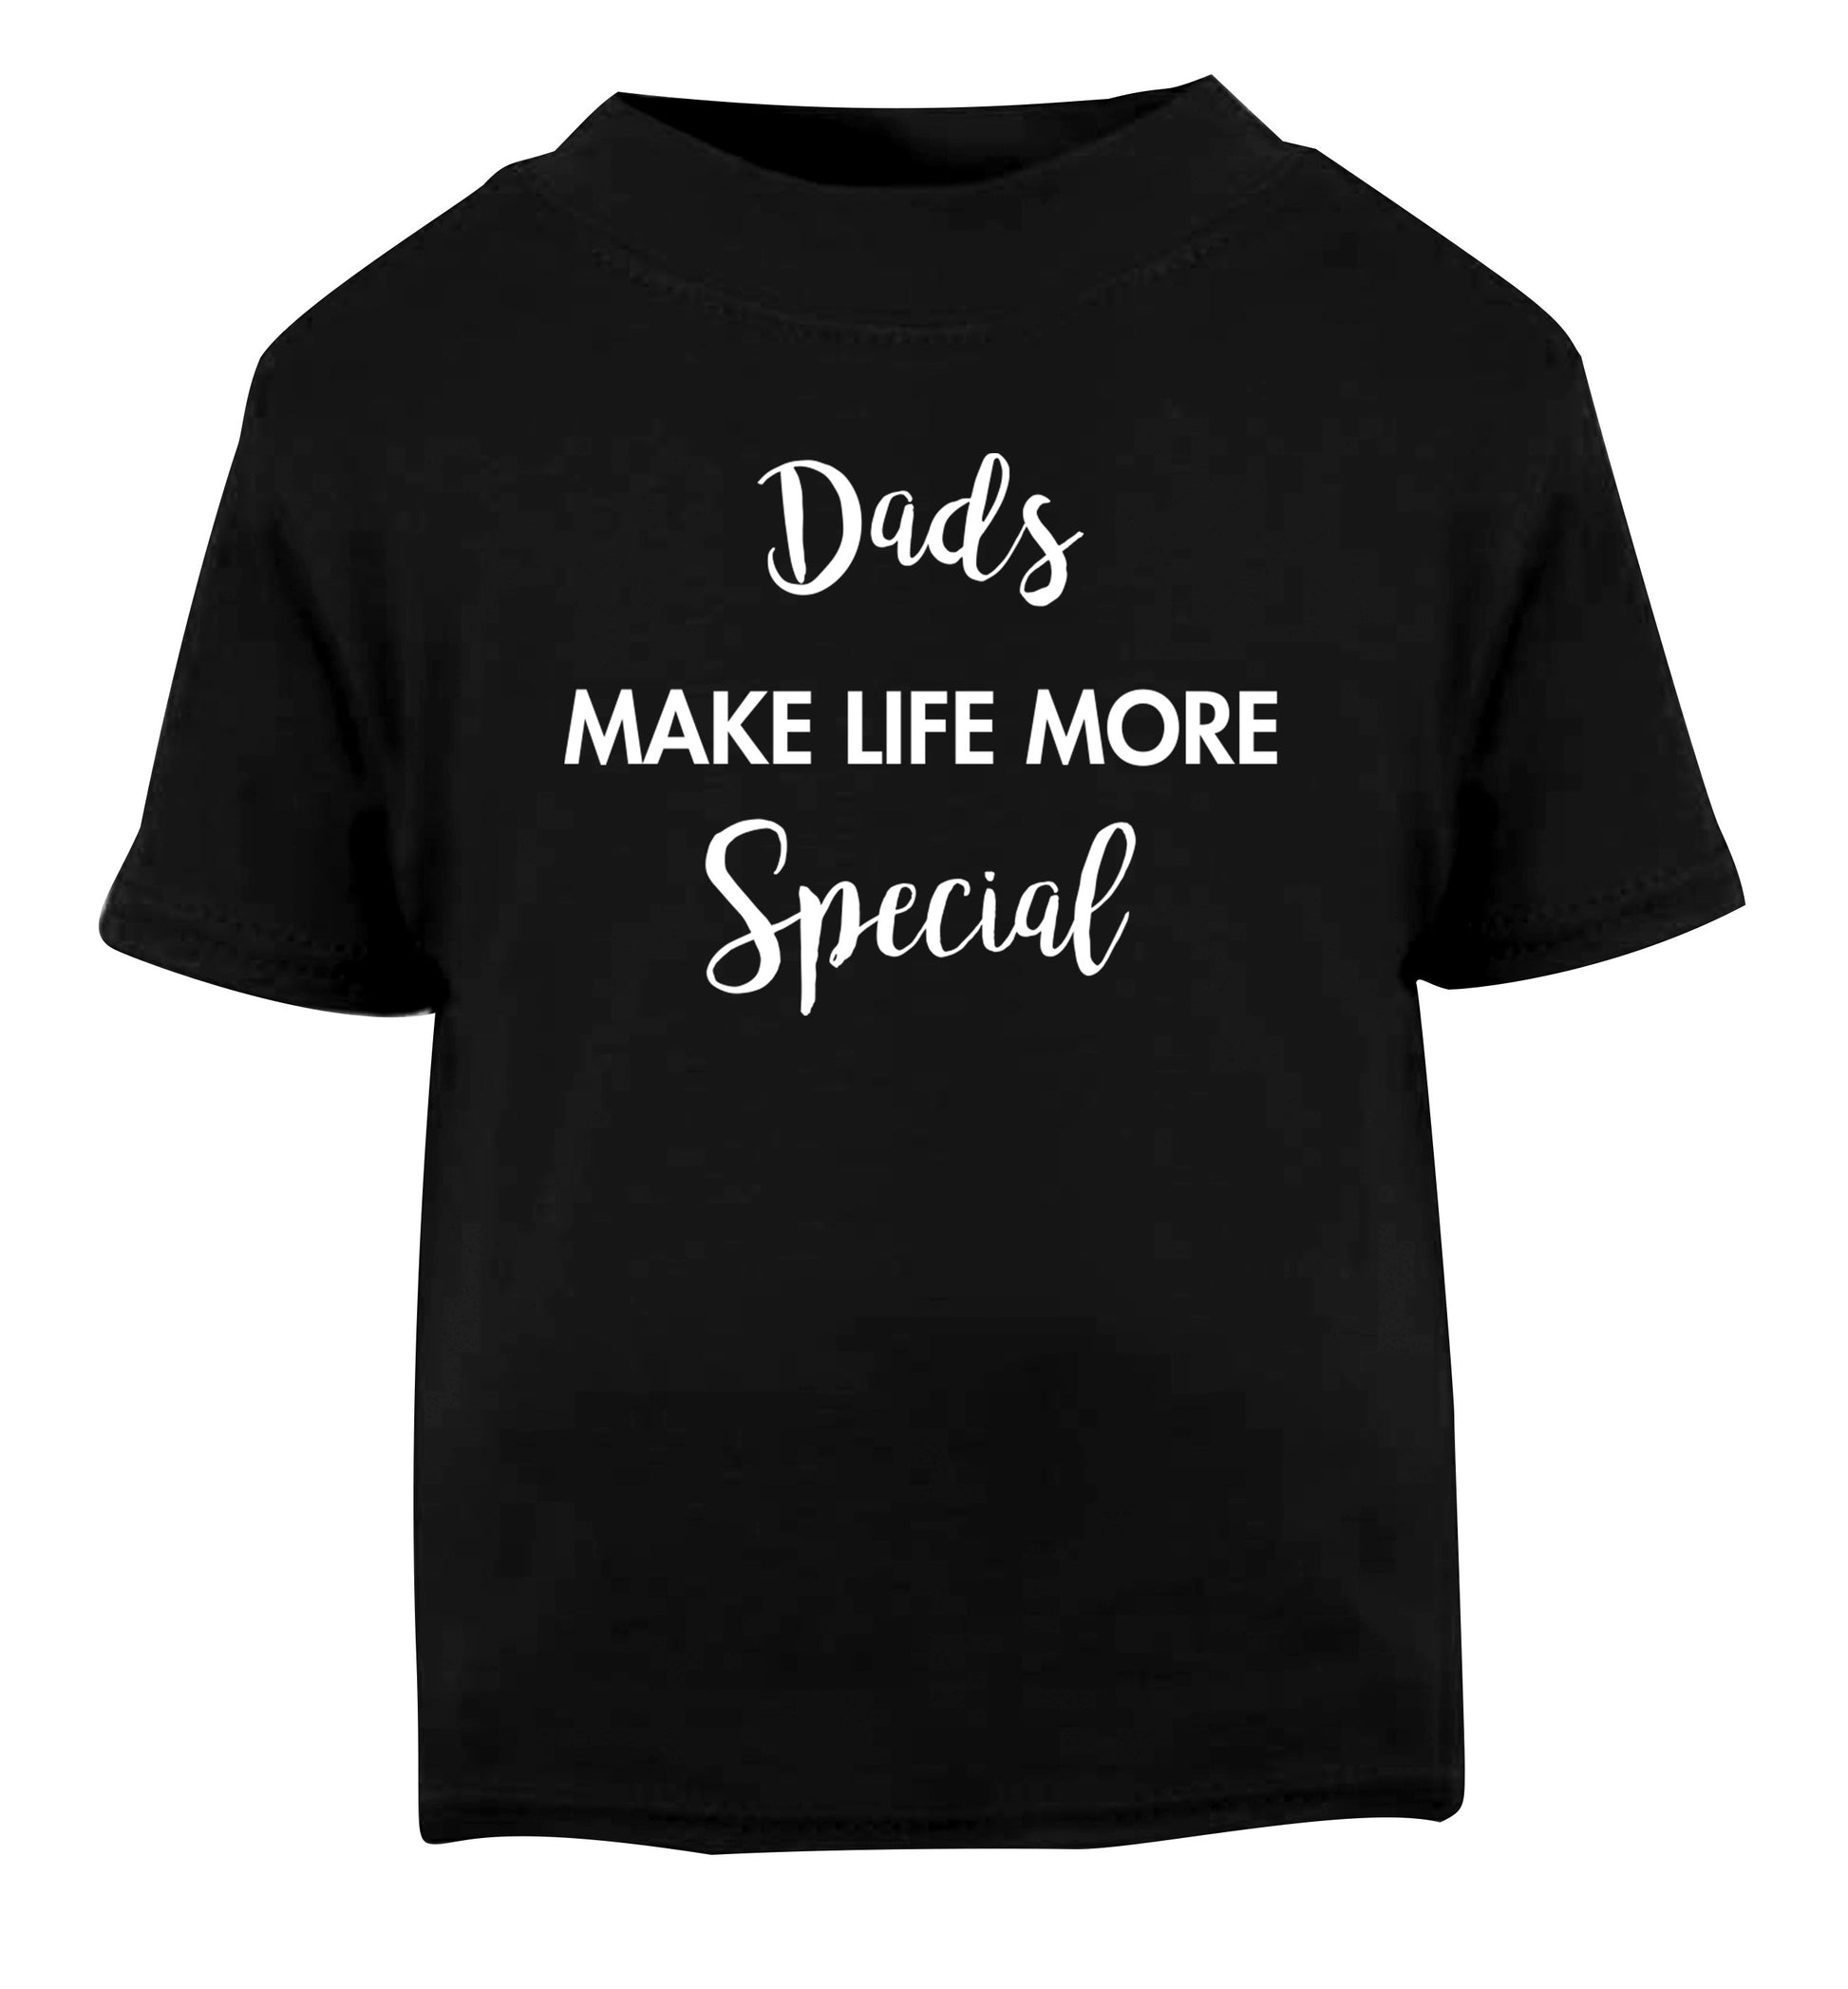 Dads make life more special Black Baby Toddler Tshirt 2 years